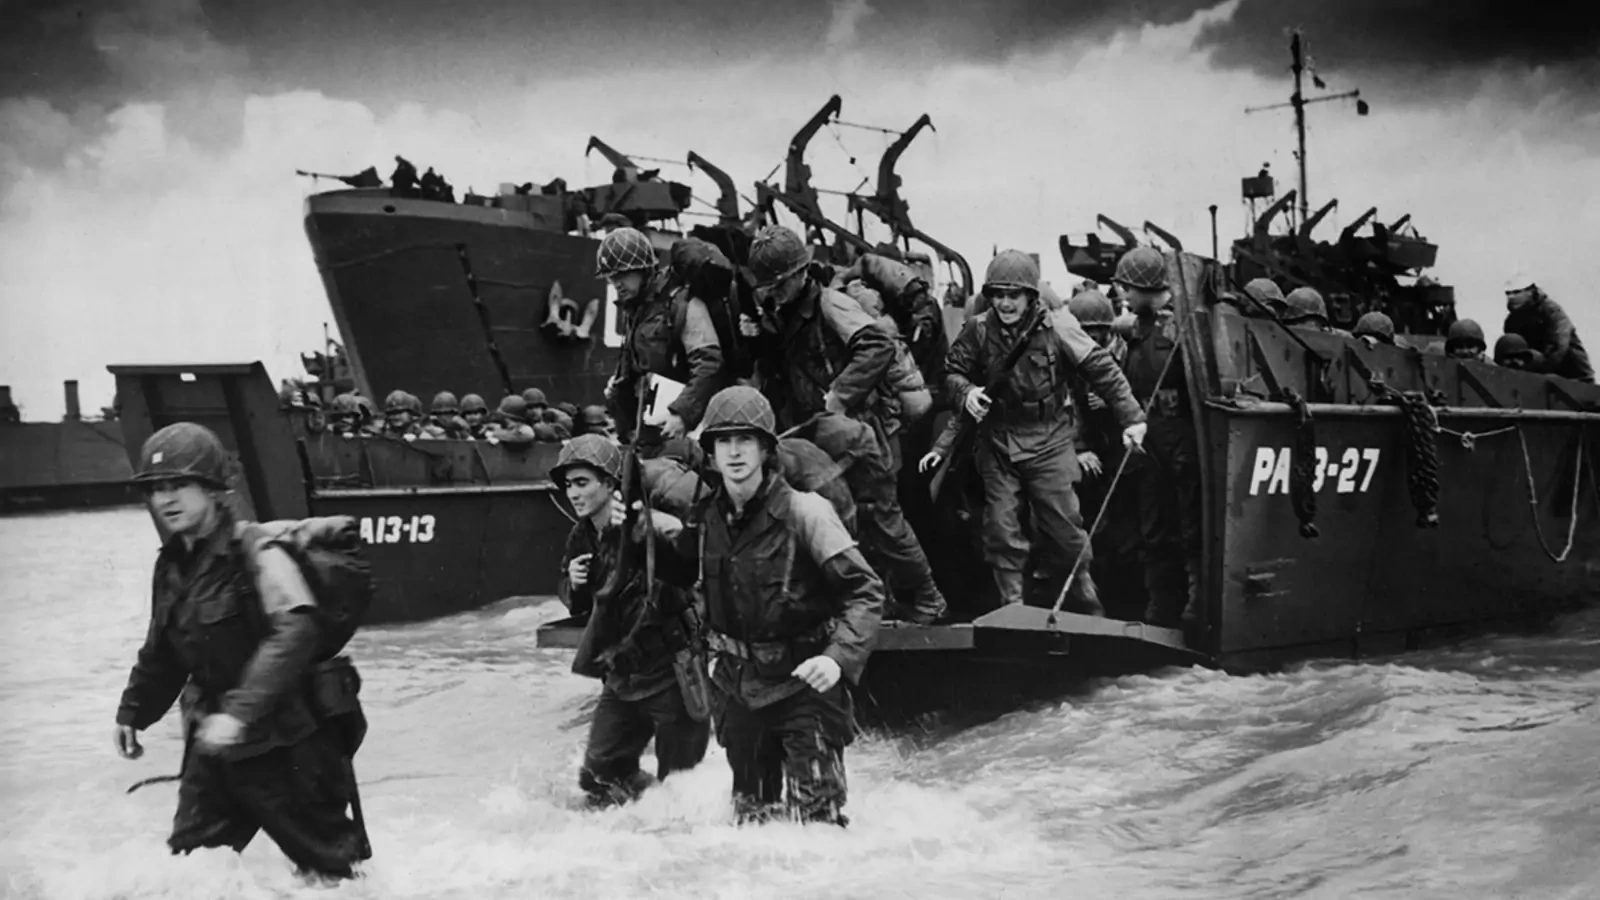 Troops disembark from a barge during the allied landings in Normandy, France, on June 6, 1944. The landings were a turning point in the allied campaign against Nazi Germany in World War II.